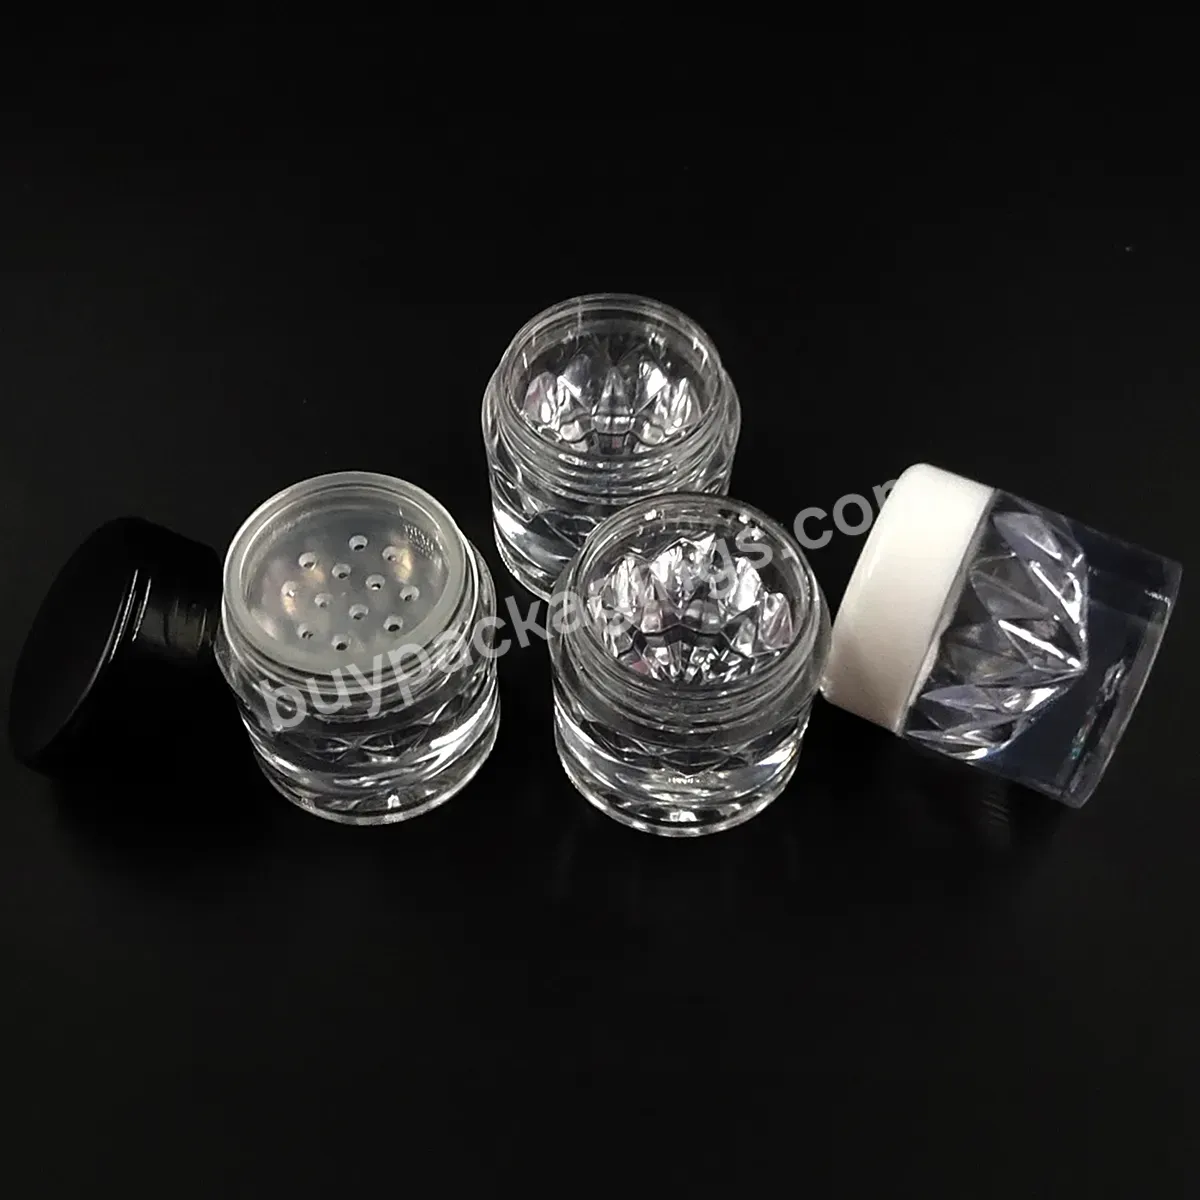 3g Loose Powder Jars Glitter Jar With Sifter Mesh Empty Diy Nail Glitter Container Packing Case Black Cap Diamond Shape